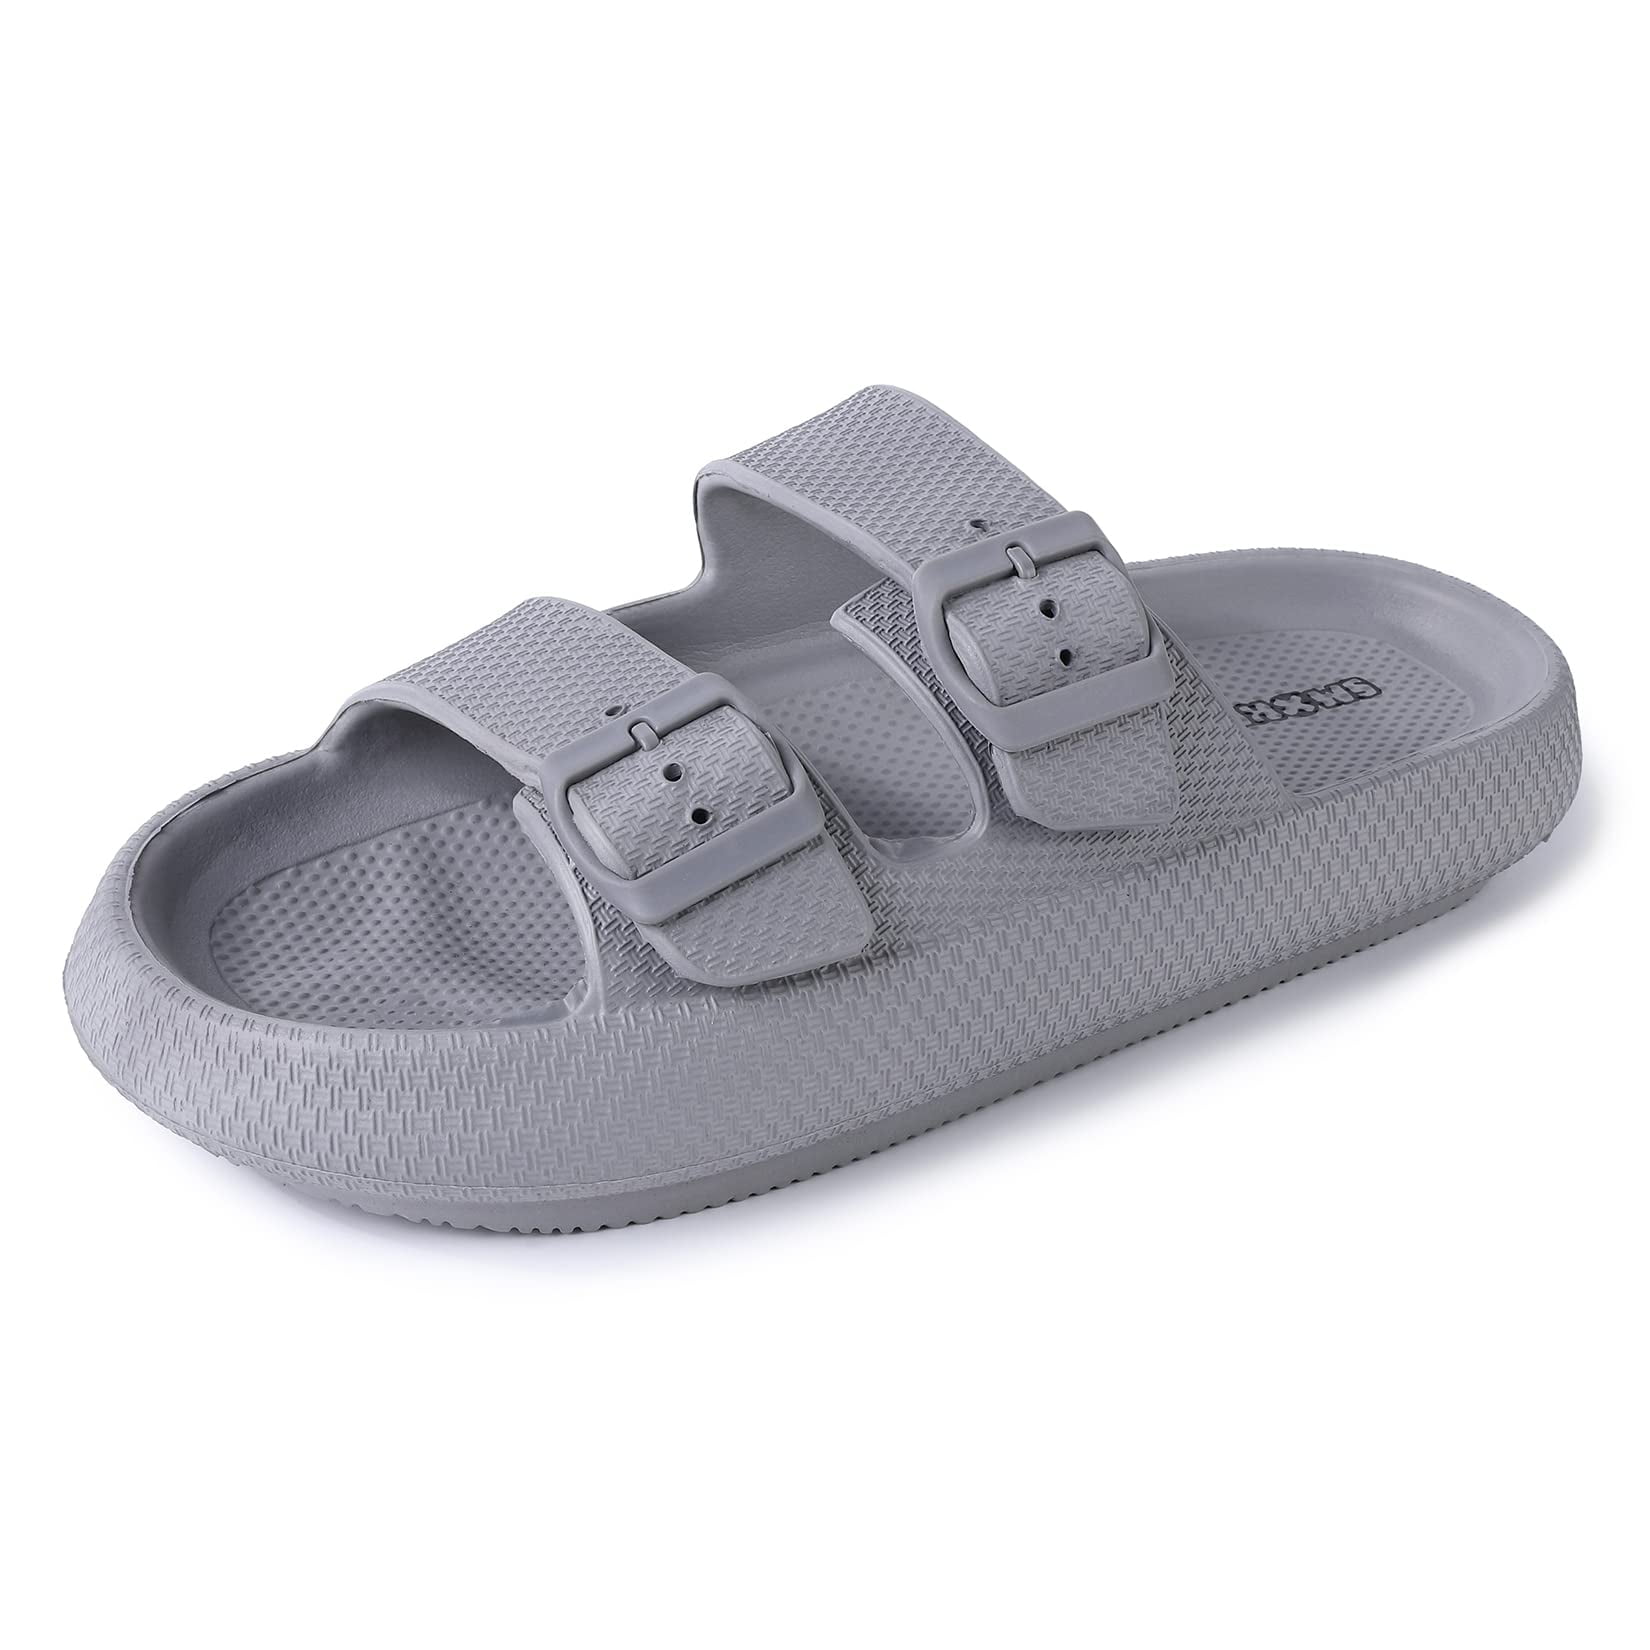 Pillow Slides Cloud Slides for Women and Men | Double Buckle Adjustable Sandals for Women Pillow Slippers Thick Sole Cushionable Sandals Eva